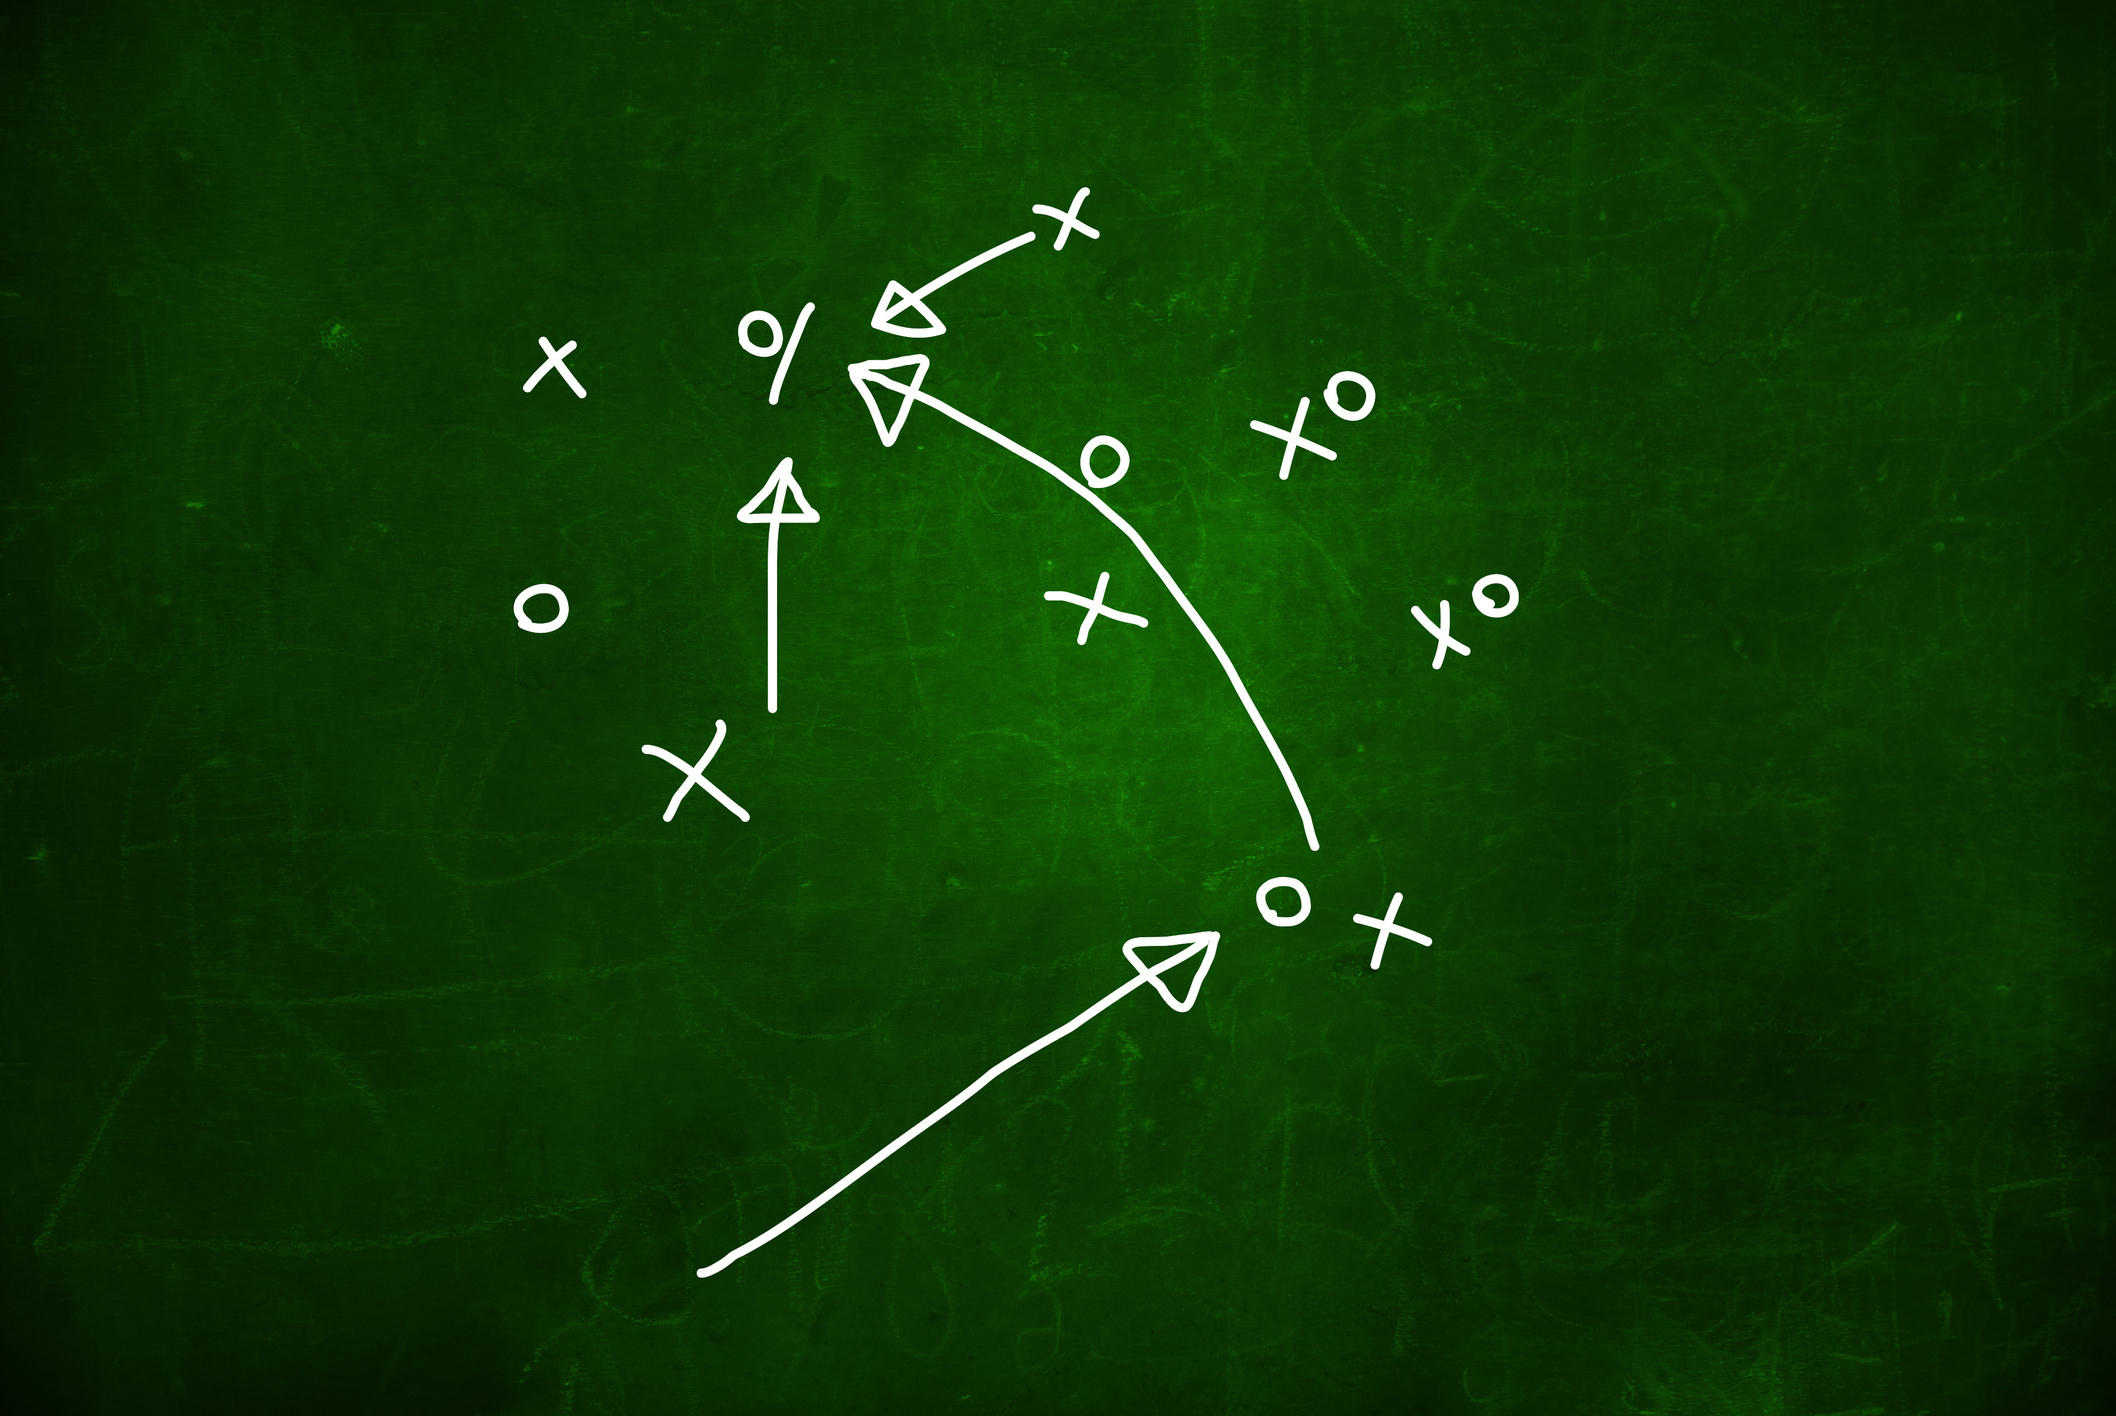 Strategy For Playing Football Drawn On A Chalk Board